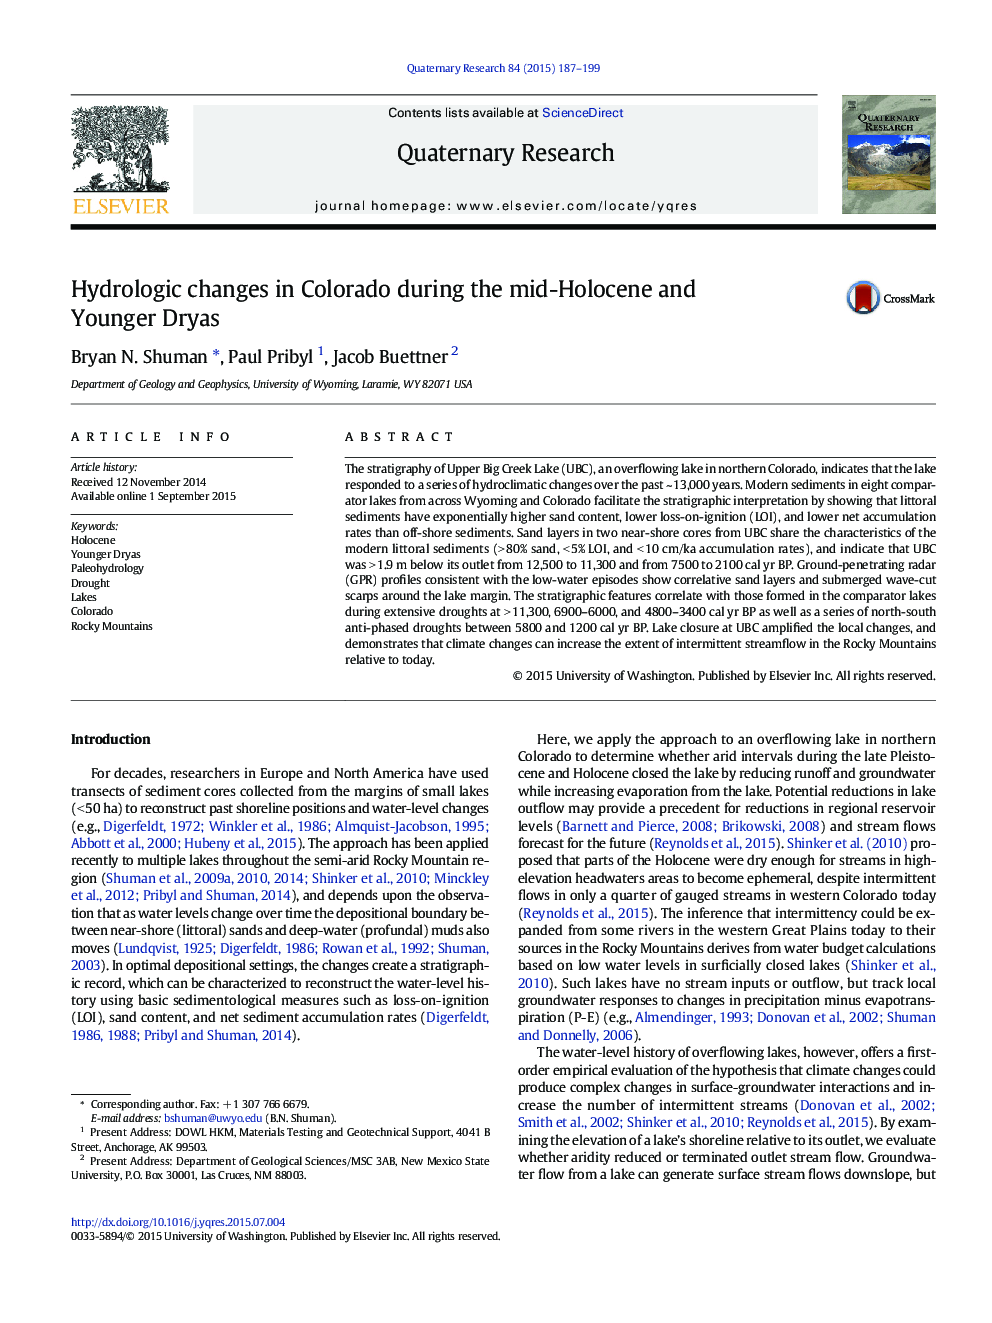 Hydrologic changes in Colorado during the mid-Holocene and Younger Dryas